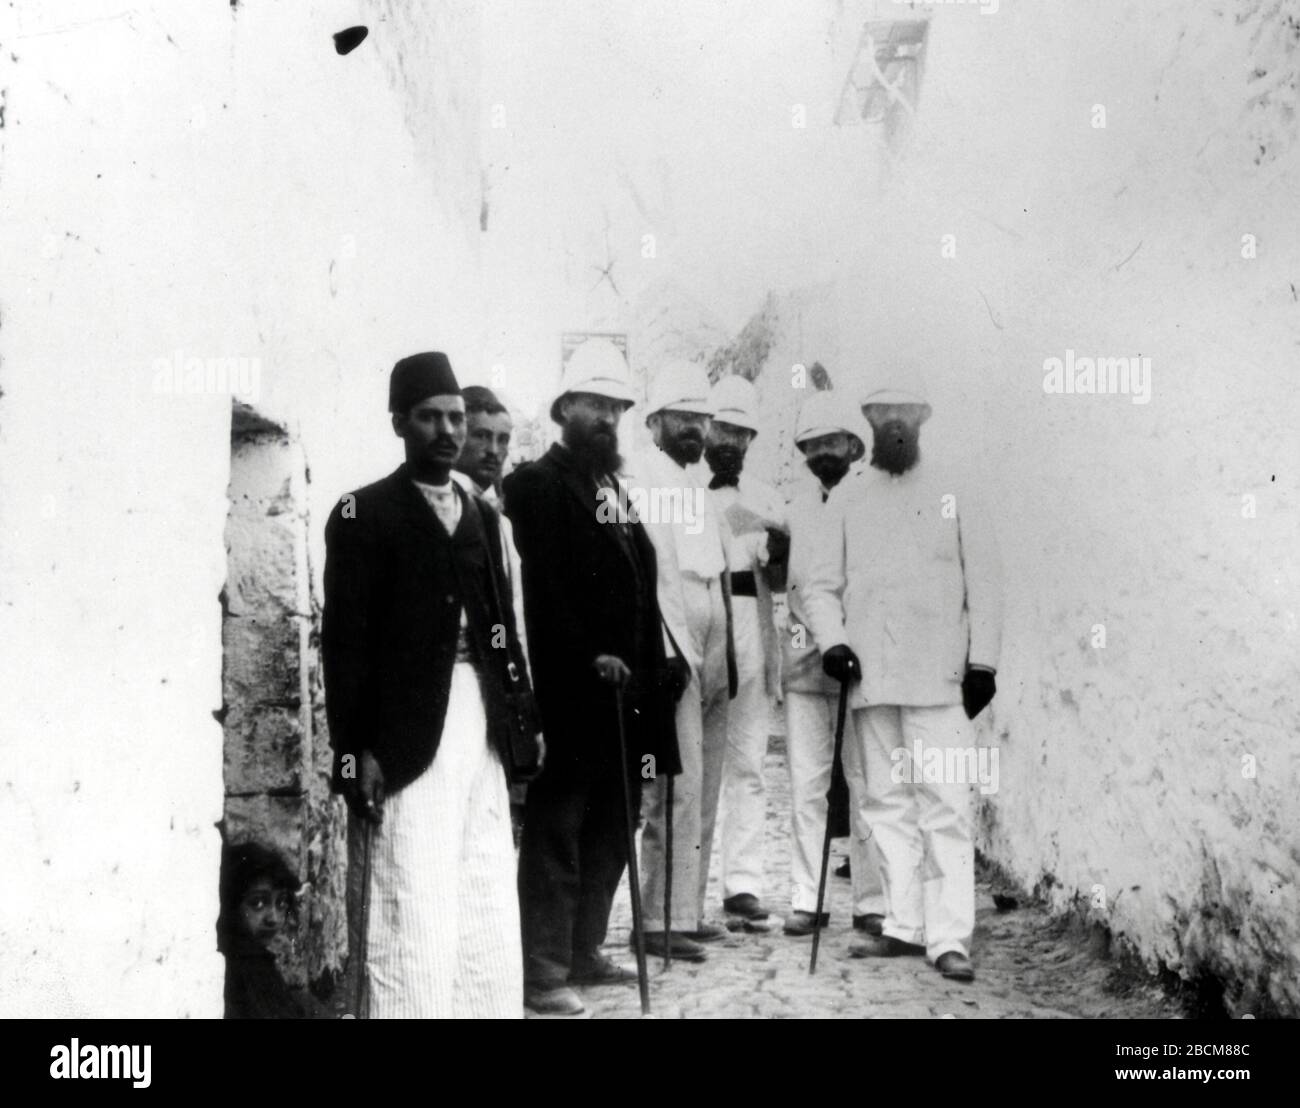 'English: THEODOR HERZL WITH A ZIONIST DELEGATION IN THE OLD CITY OF JERUSALEM IN 1898. ◊™◊ê◊ï◊ì◊ï◊® ◊î◊®◊¶◊ú ◊¢◊ù ◊î◊û◊©◊ú◊ó◊™ ◊î◊¶◊ô◊ï◊†◊ô◊™ ◊ë◊ô◊®◊ï◊©◊ú◊ô◊ù ◊î◊¢◊™◊ô◊ß◊î - ◊©◊†◊™ 1898.; 1 January 1898; This is available from National Photo Collection of Israel, Photography dept. Goverment Press Office (link), under the digital ID D131-031.This tag does not indicate the copyright status of the attached work. A normal copyright tag is still required. See Commons:Licensing for more information.   English¬†| ◊¢◊ë◊®◊ô◊™¬†| –º–∞–∫–µ–¥–æ–Ω—Å–∫–∏¬†| +/‚àí; ◊ú◊©◊õ◊™ ◊î◊¢◊ô◊™◊ï◊†◊ï◊™ ◊î◊û◊û◊©◊ú◊™◊ô◊™ Stock Photo